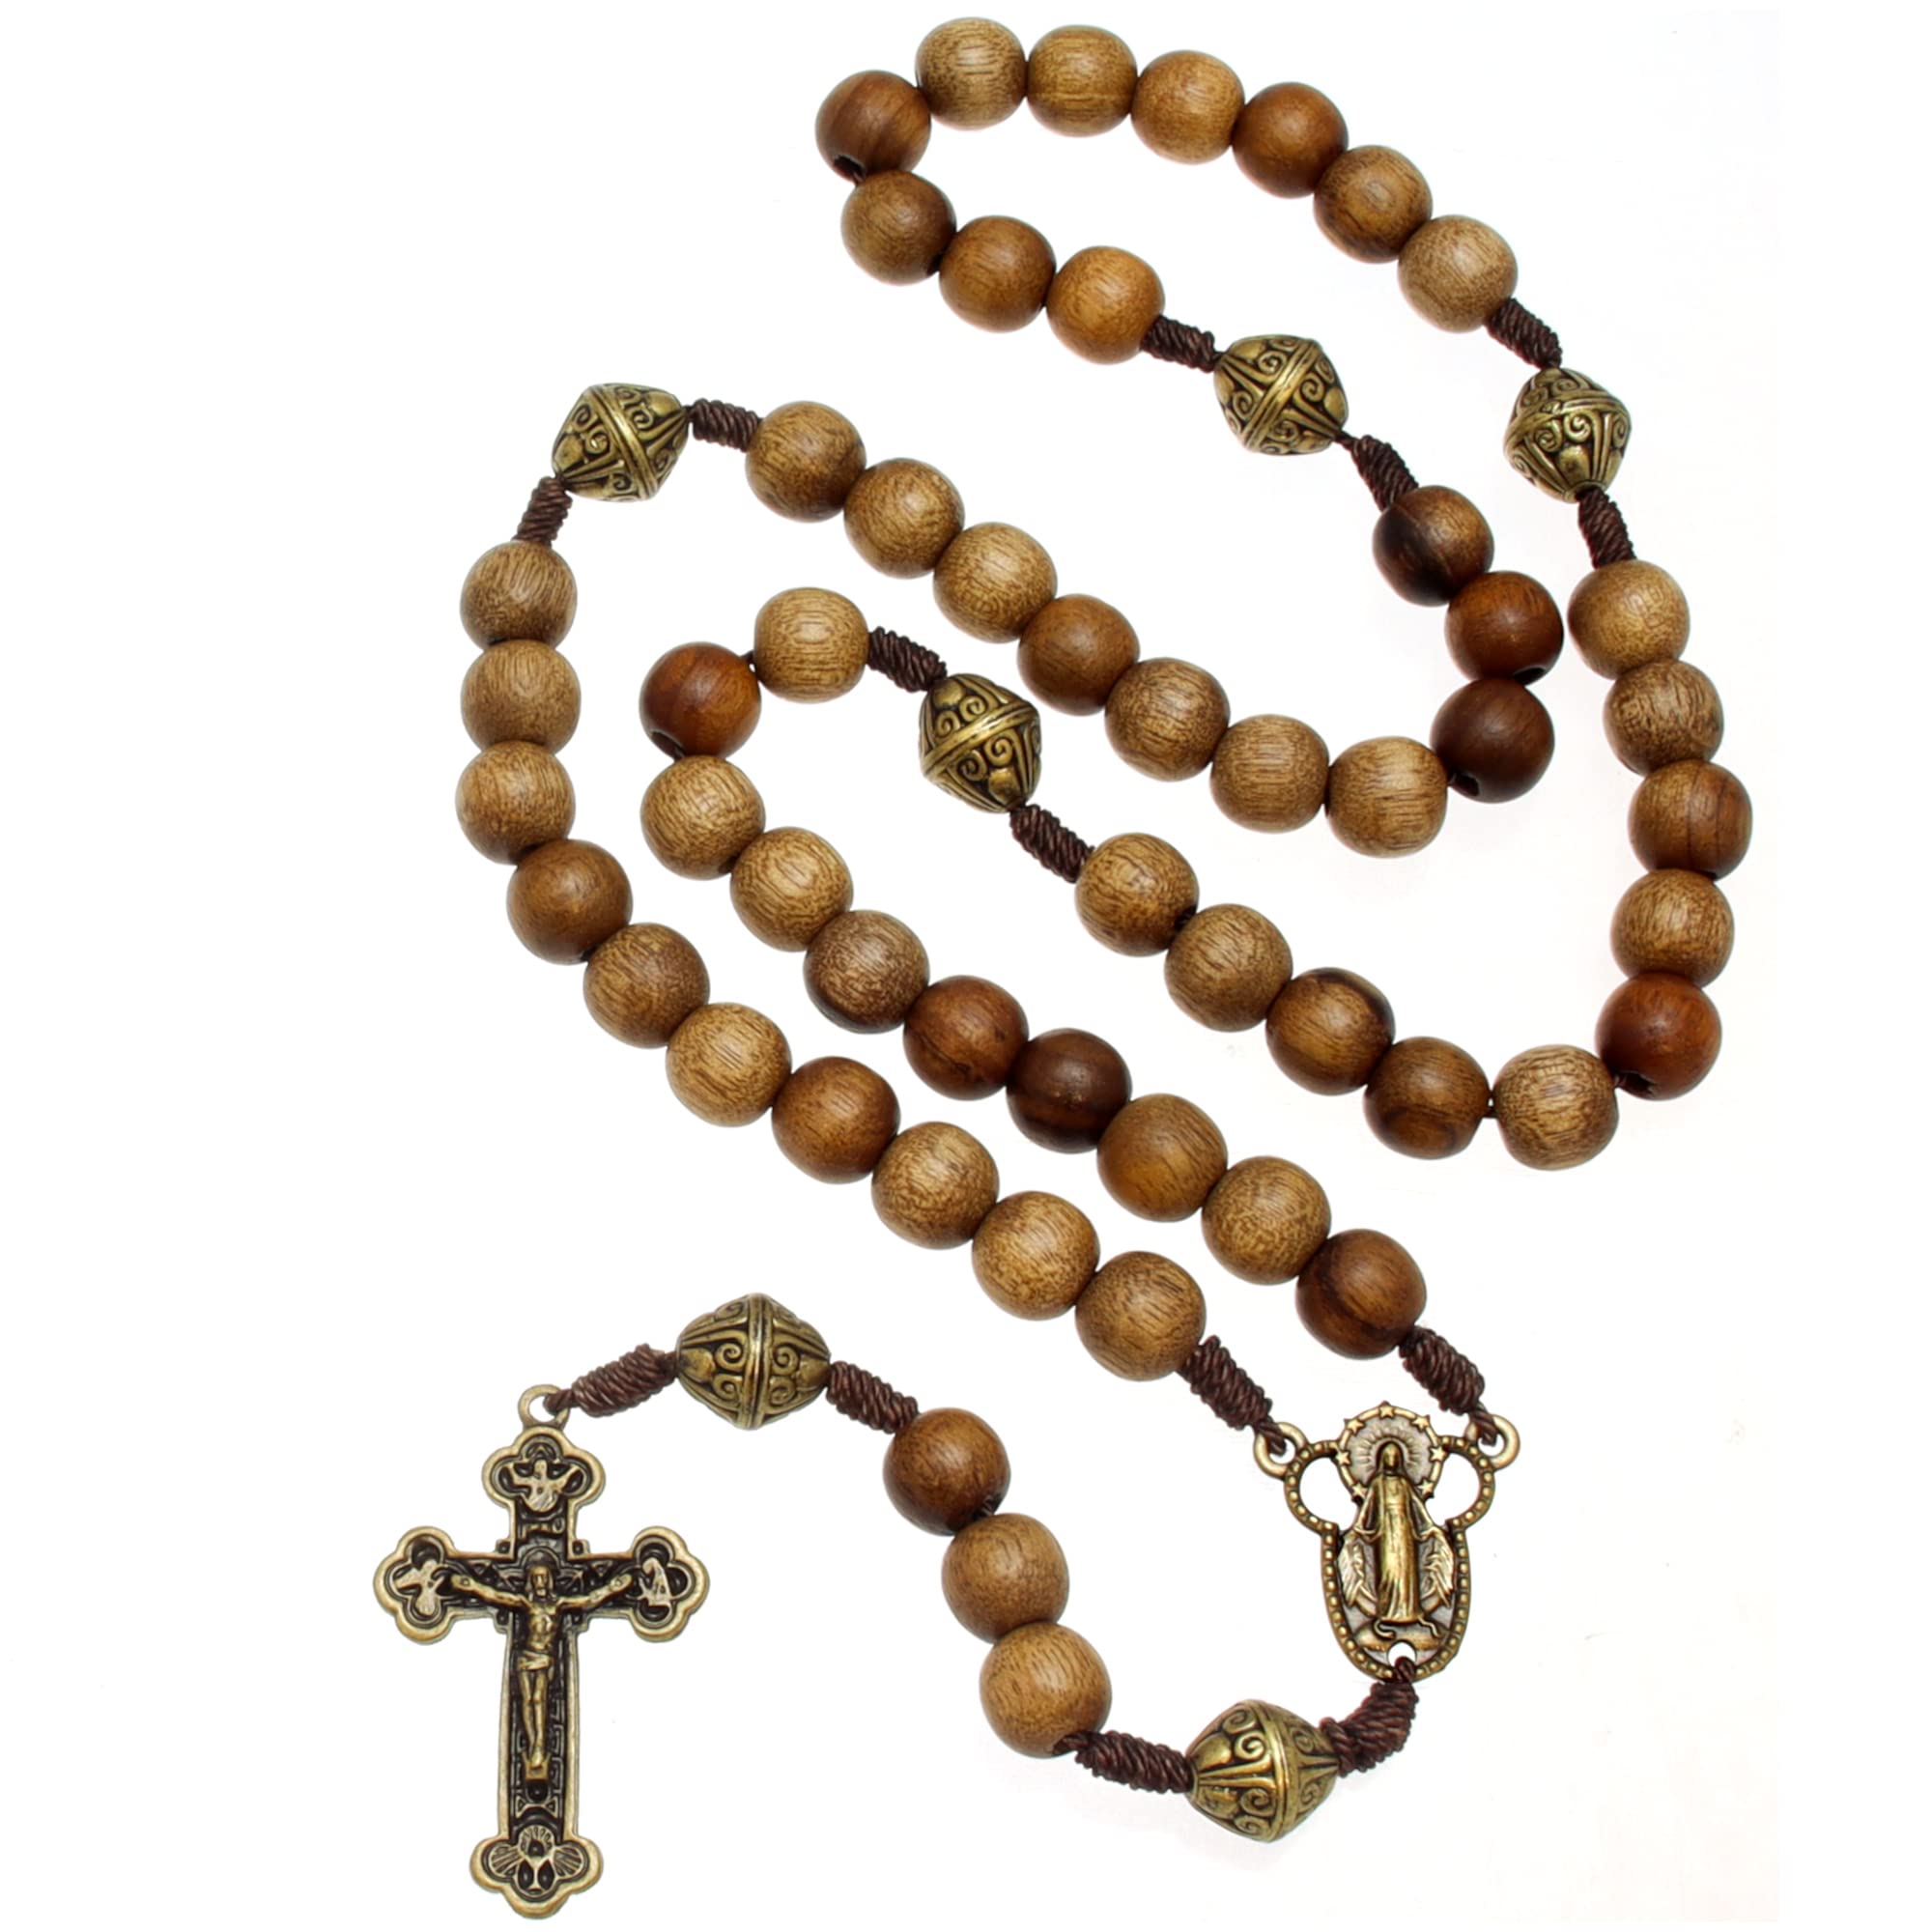 Alexander Castle Our Father Solid Wooden Rosary Beads (Handmade - Brazilian Walnut) with Miraculous Medal Junction - Comes in Velour Gift Pouch